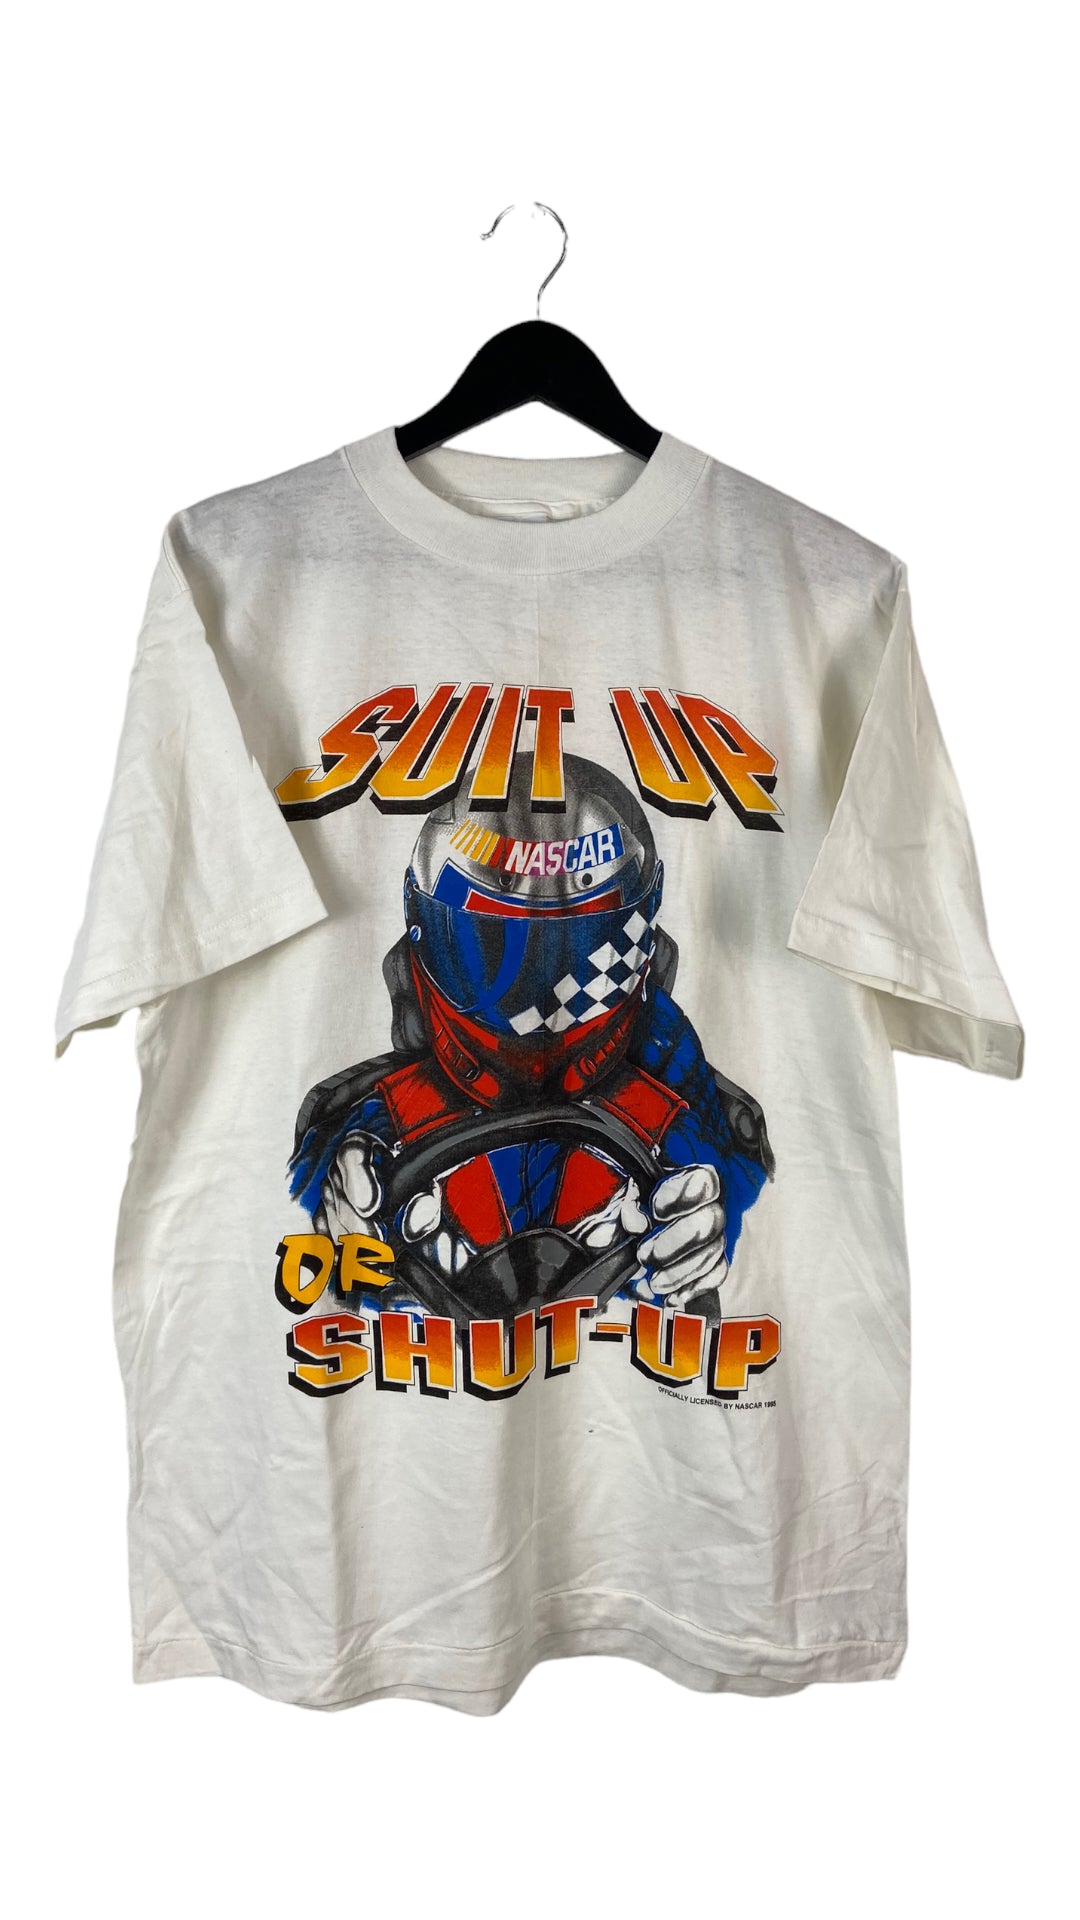 Load image into Gallery viewer, VTG NASCAR Suit Up Or Shut Up Tee Sz L
